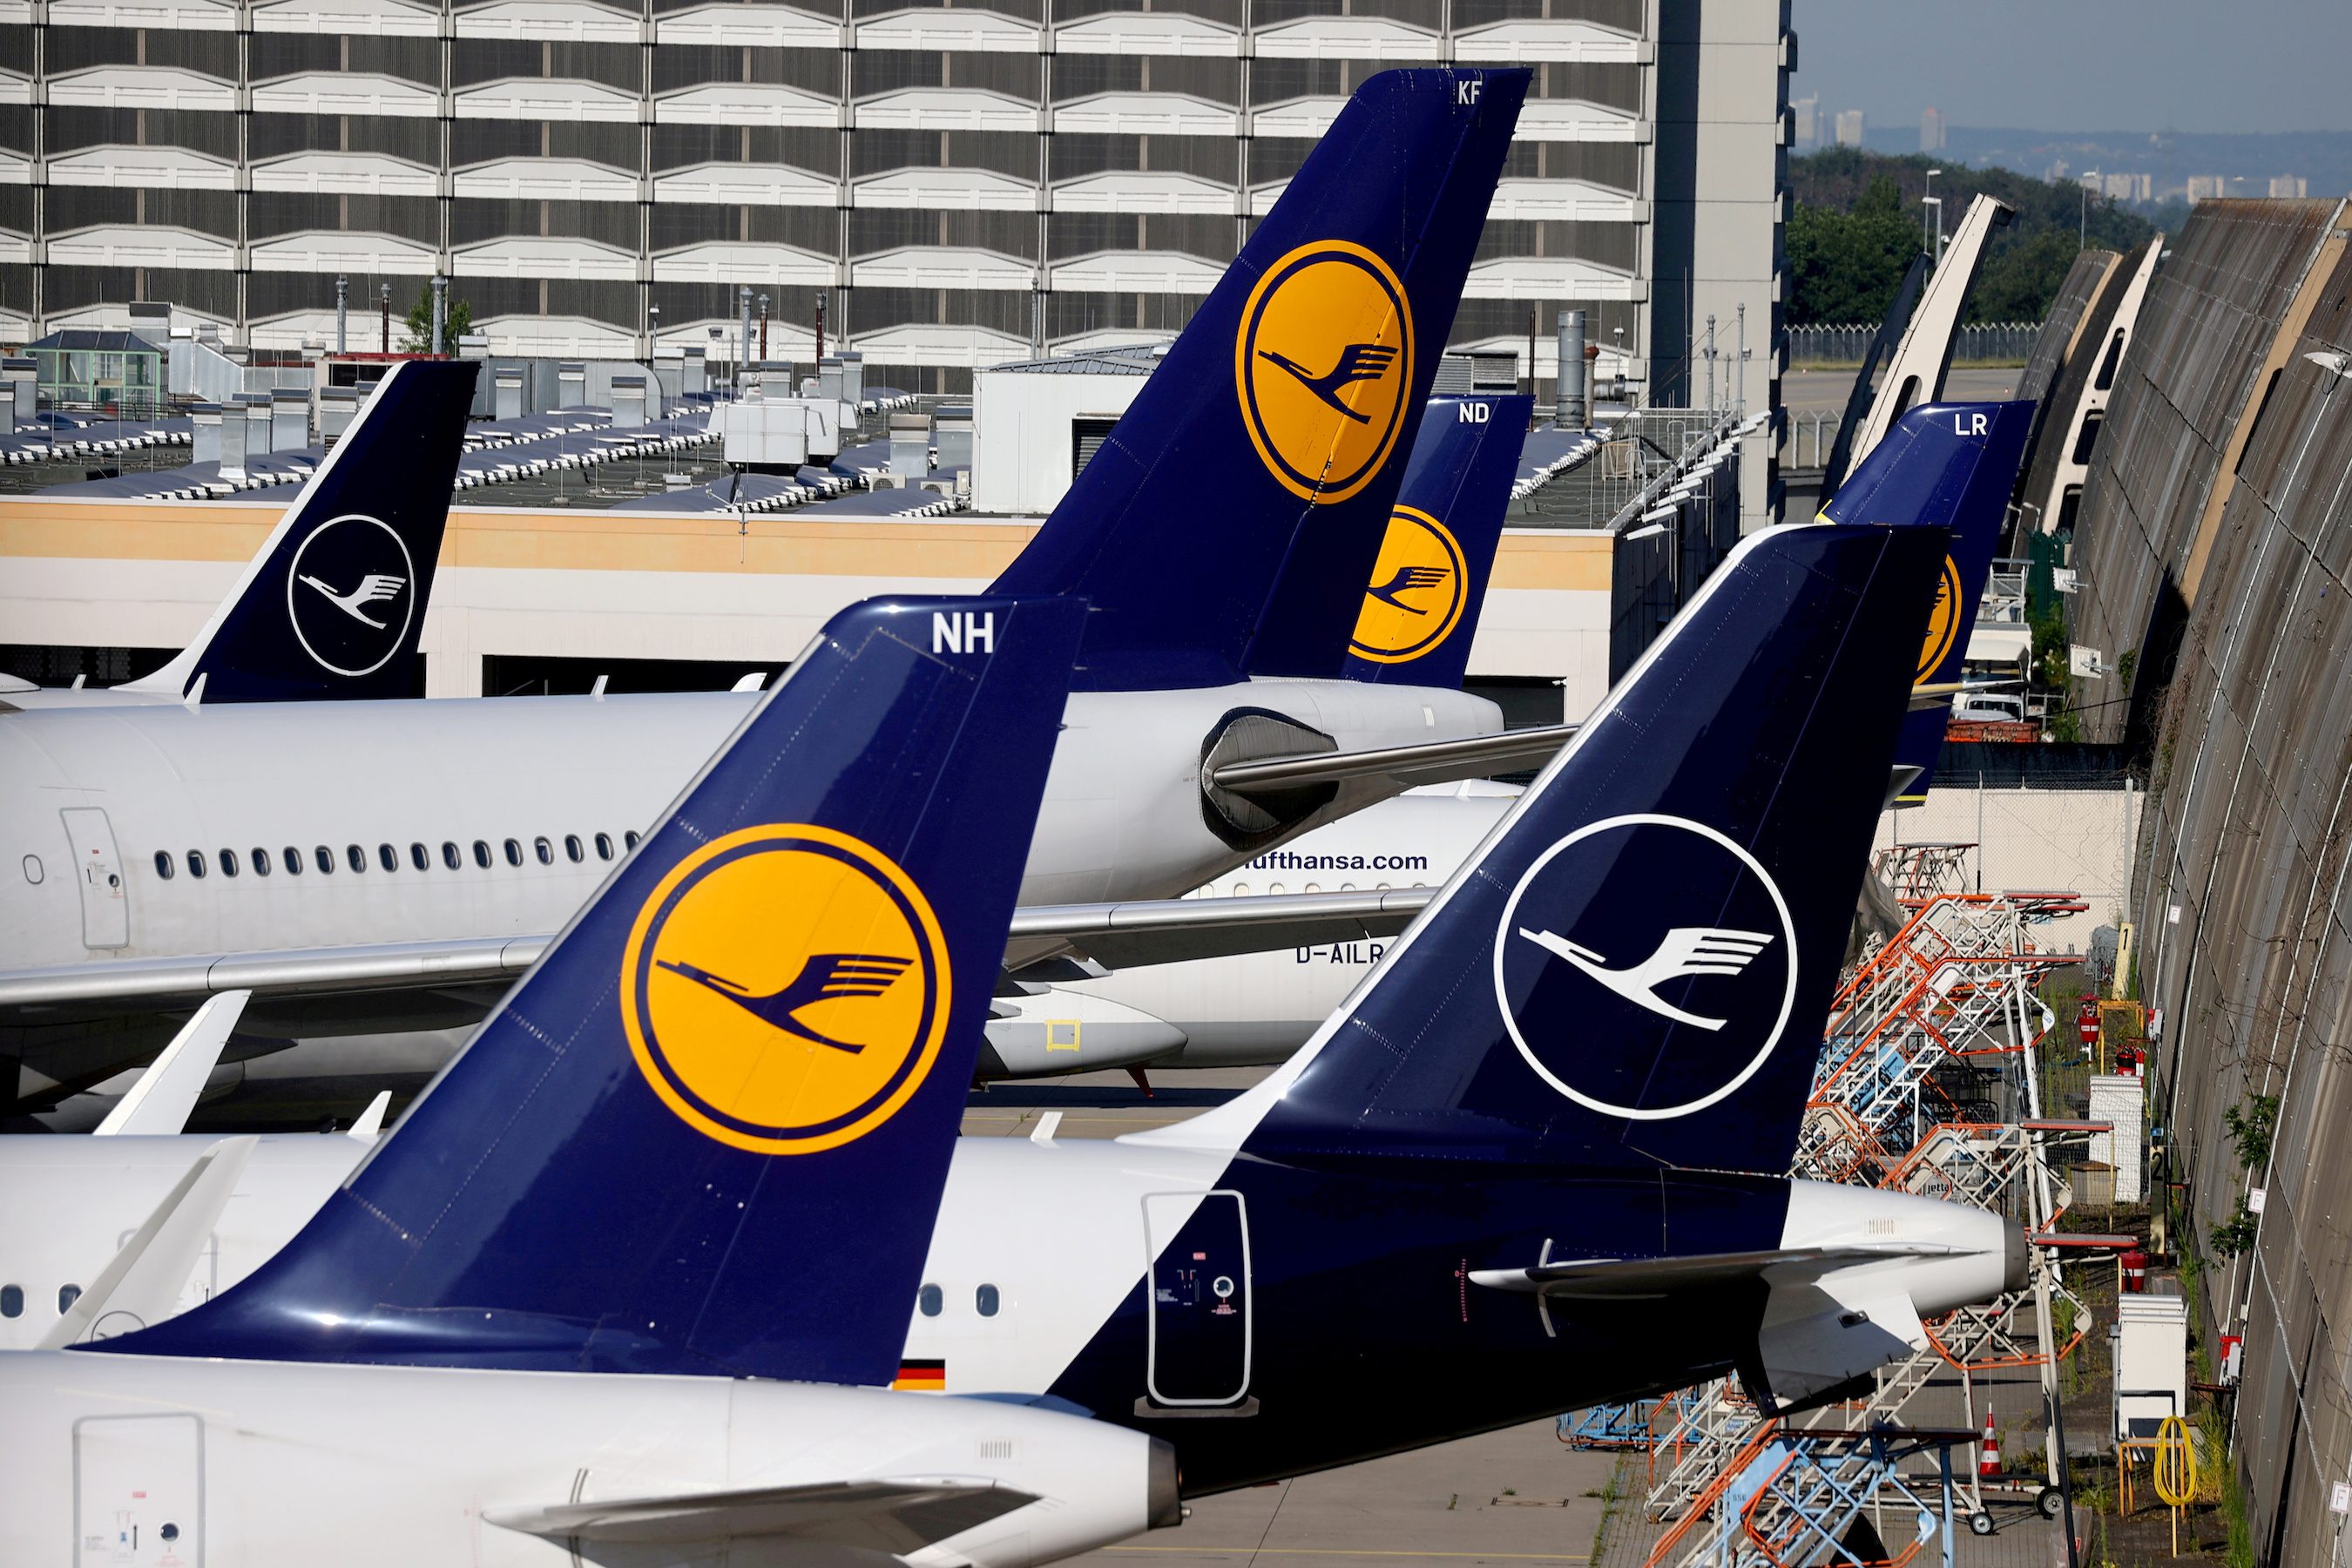 Demand for Lufthansa flights to US soars on reopening